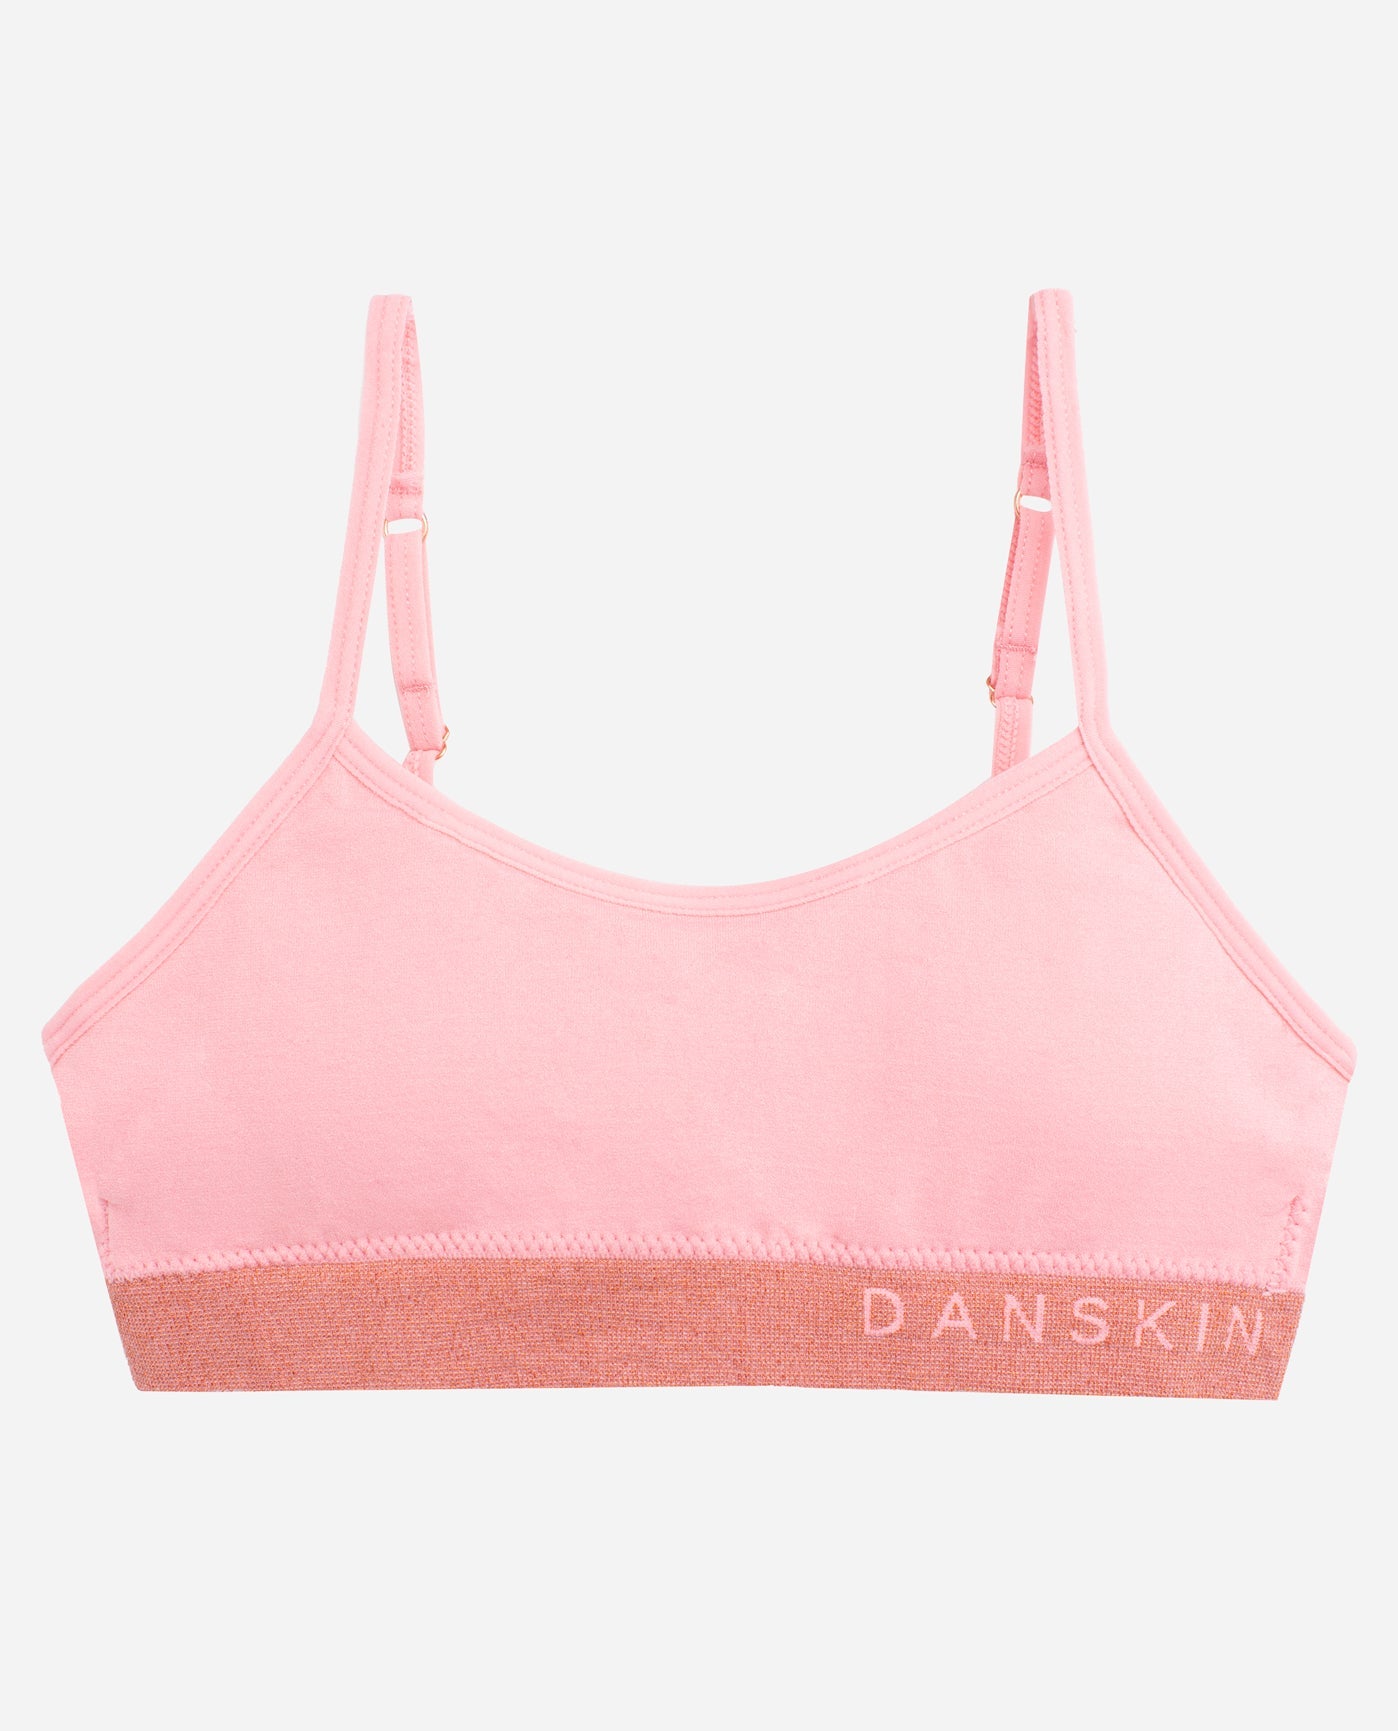 NWT DANSKIN GIRL 3 Youth Padded BRAS White / White & Gray / Pink Size 32A  or 36A